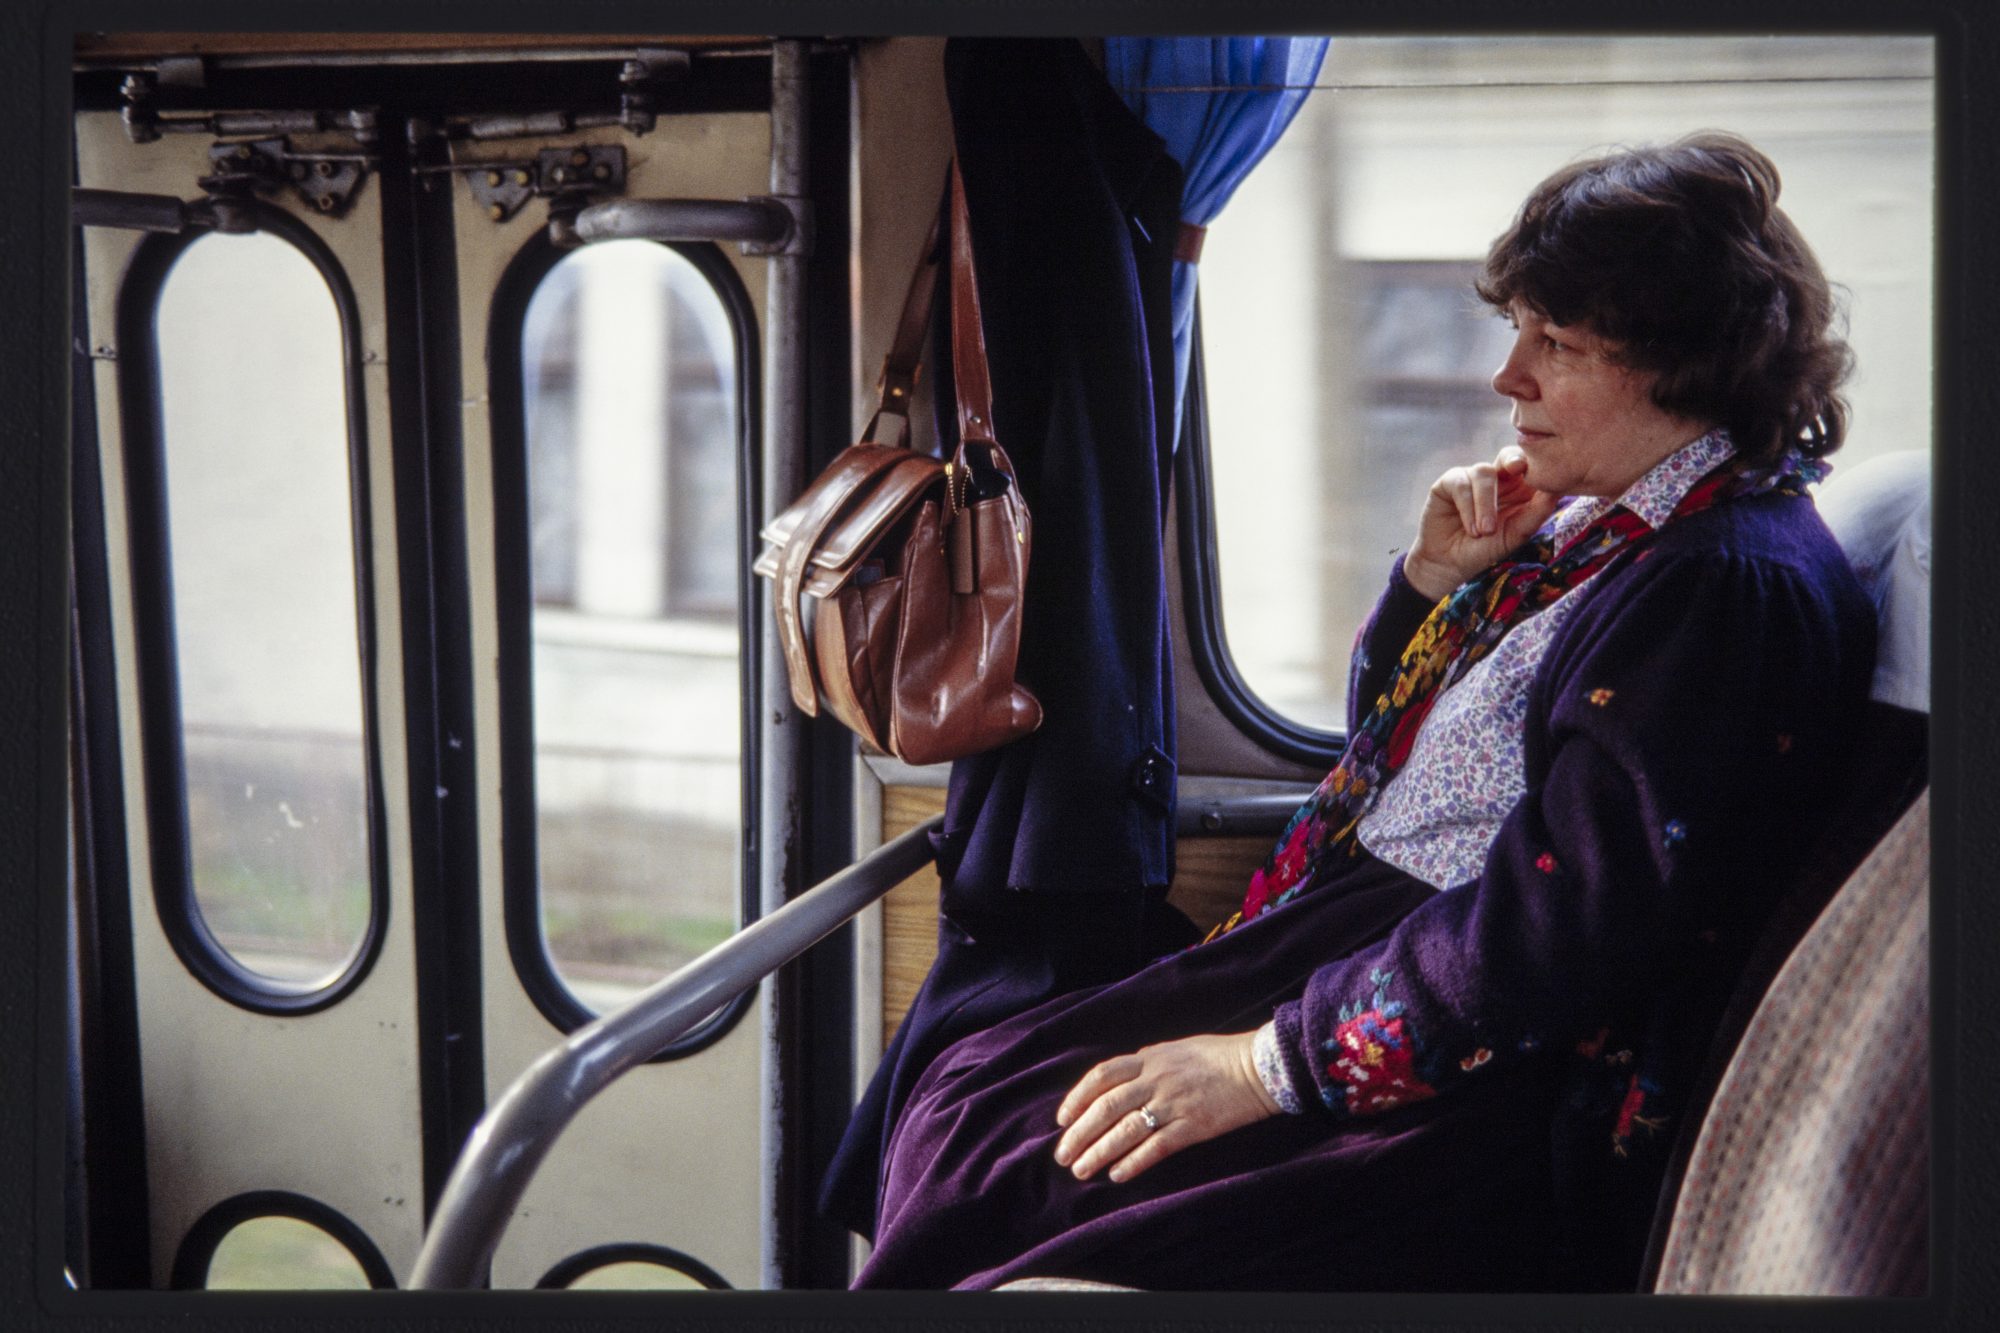 Nela Williams rides a tram in Zagreb. She owns no car and travels by public transport.